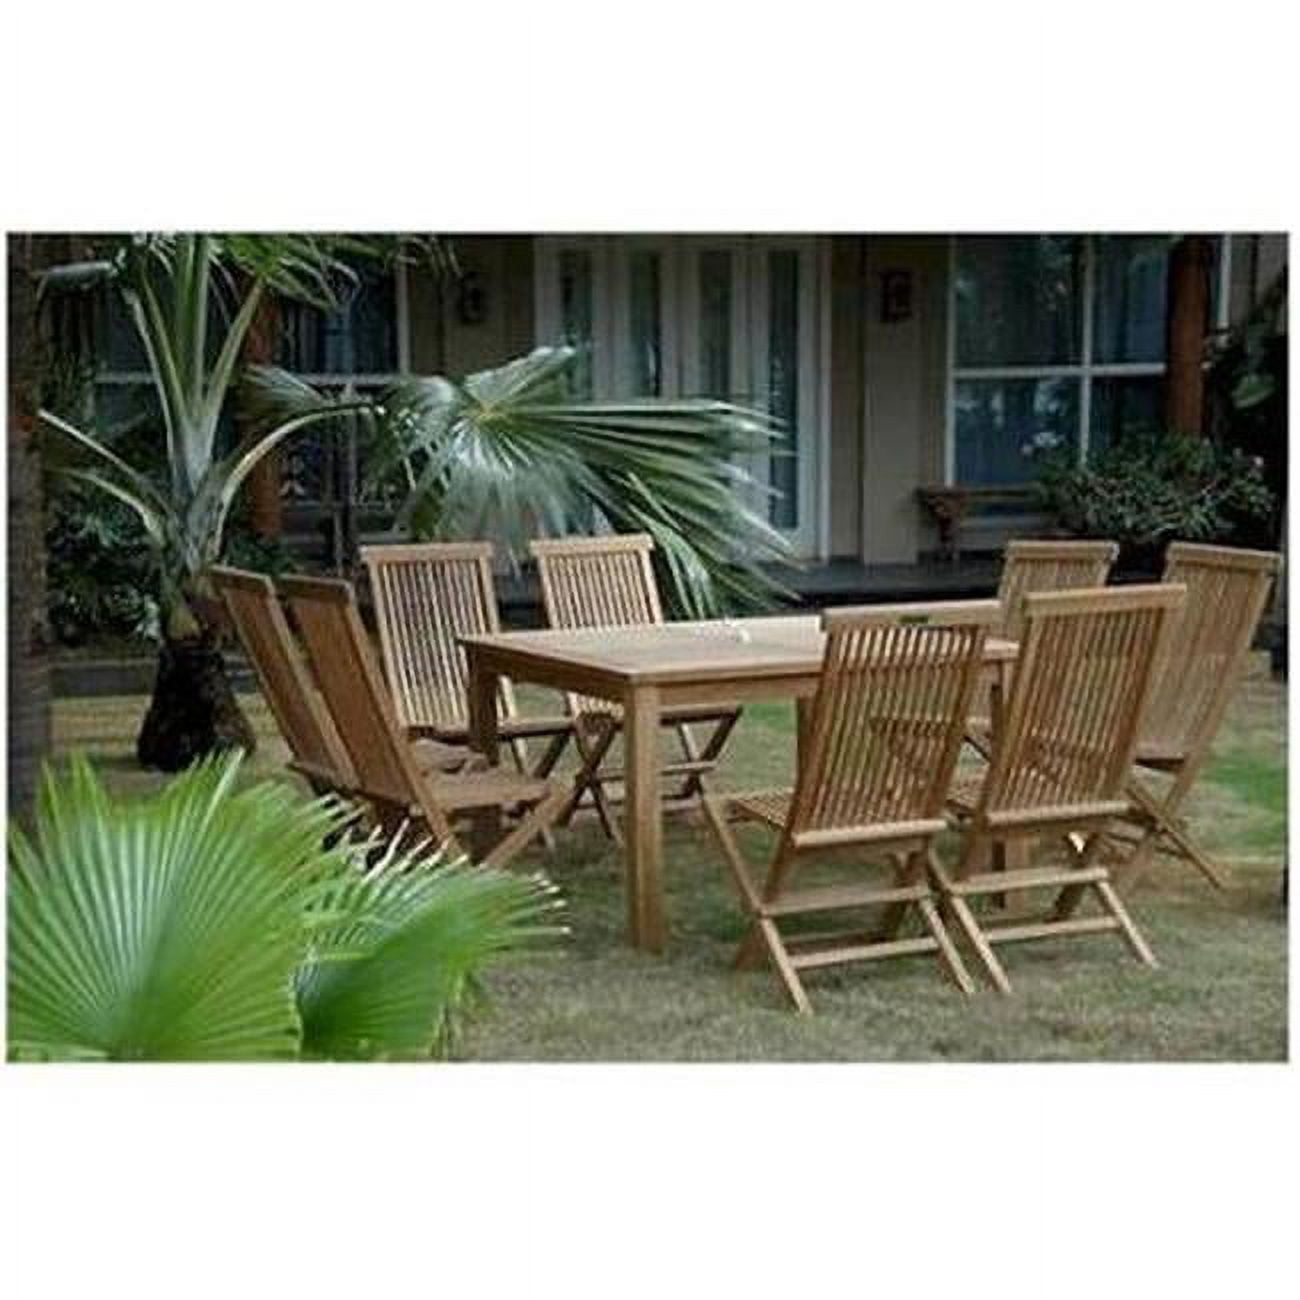 Set-104 Classic Folding Chair - Pack Of 6